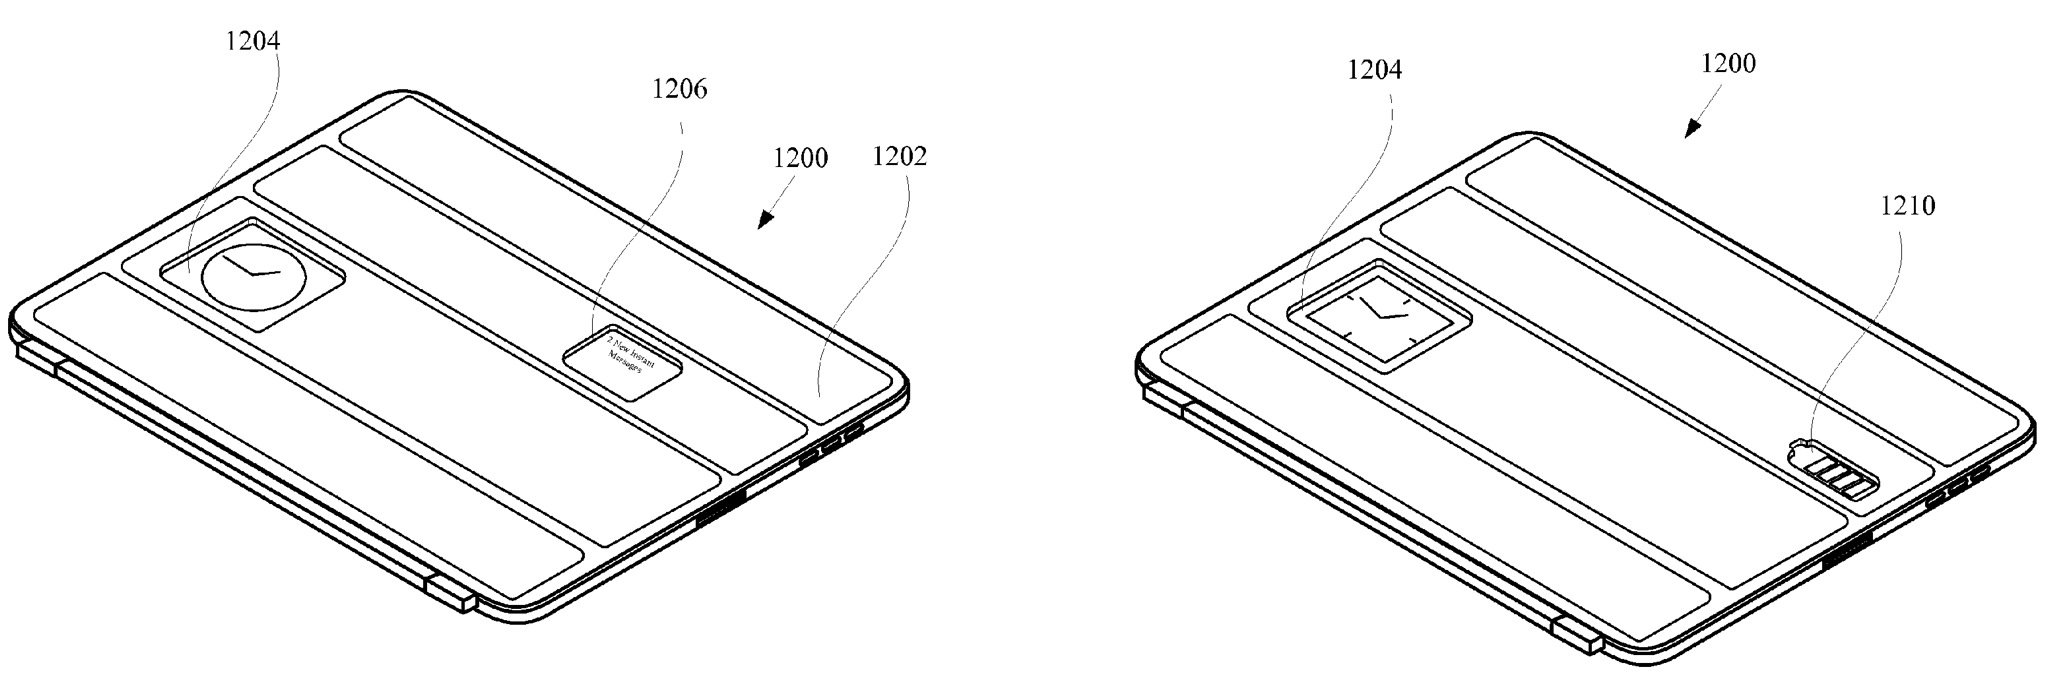 Apple seethrough Smart Cover patent (drawing 003)